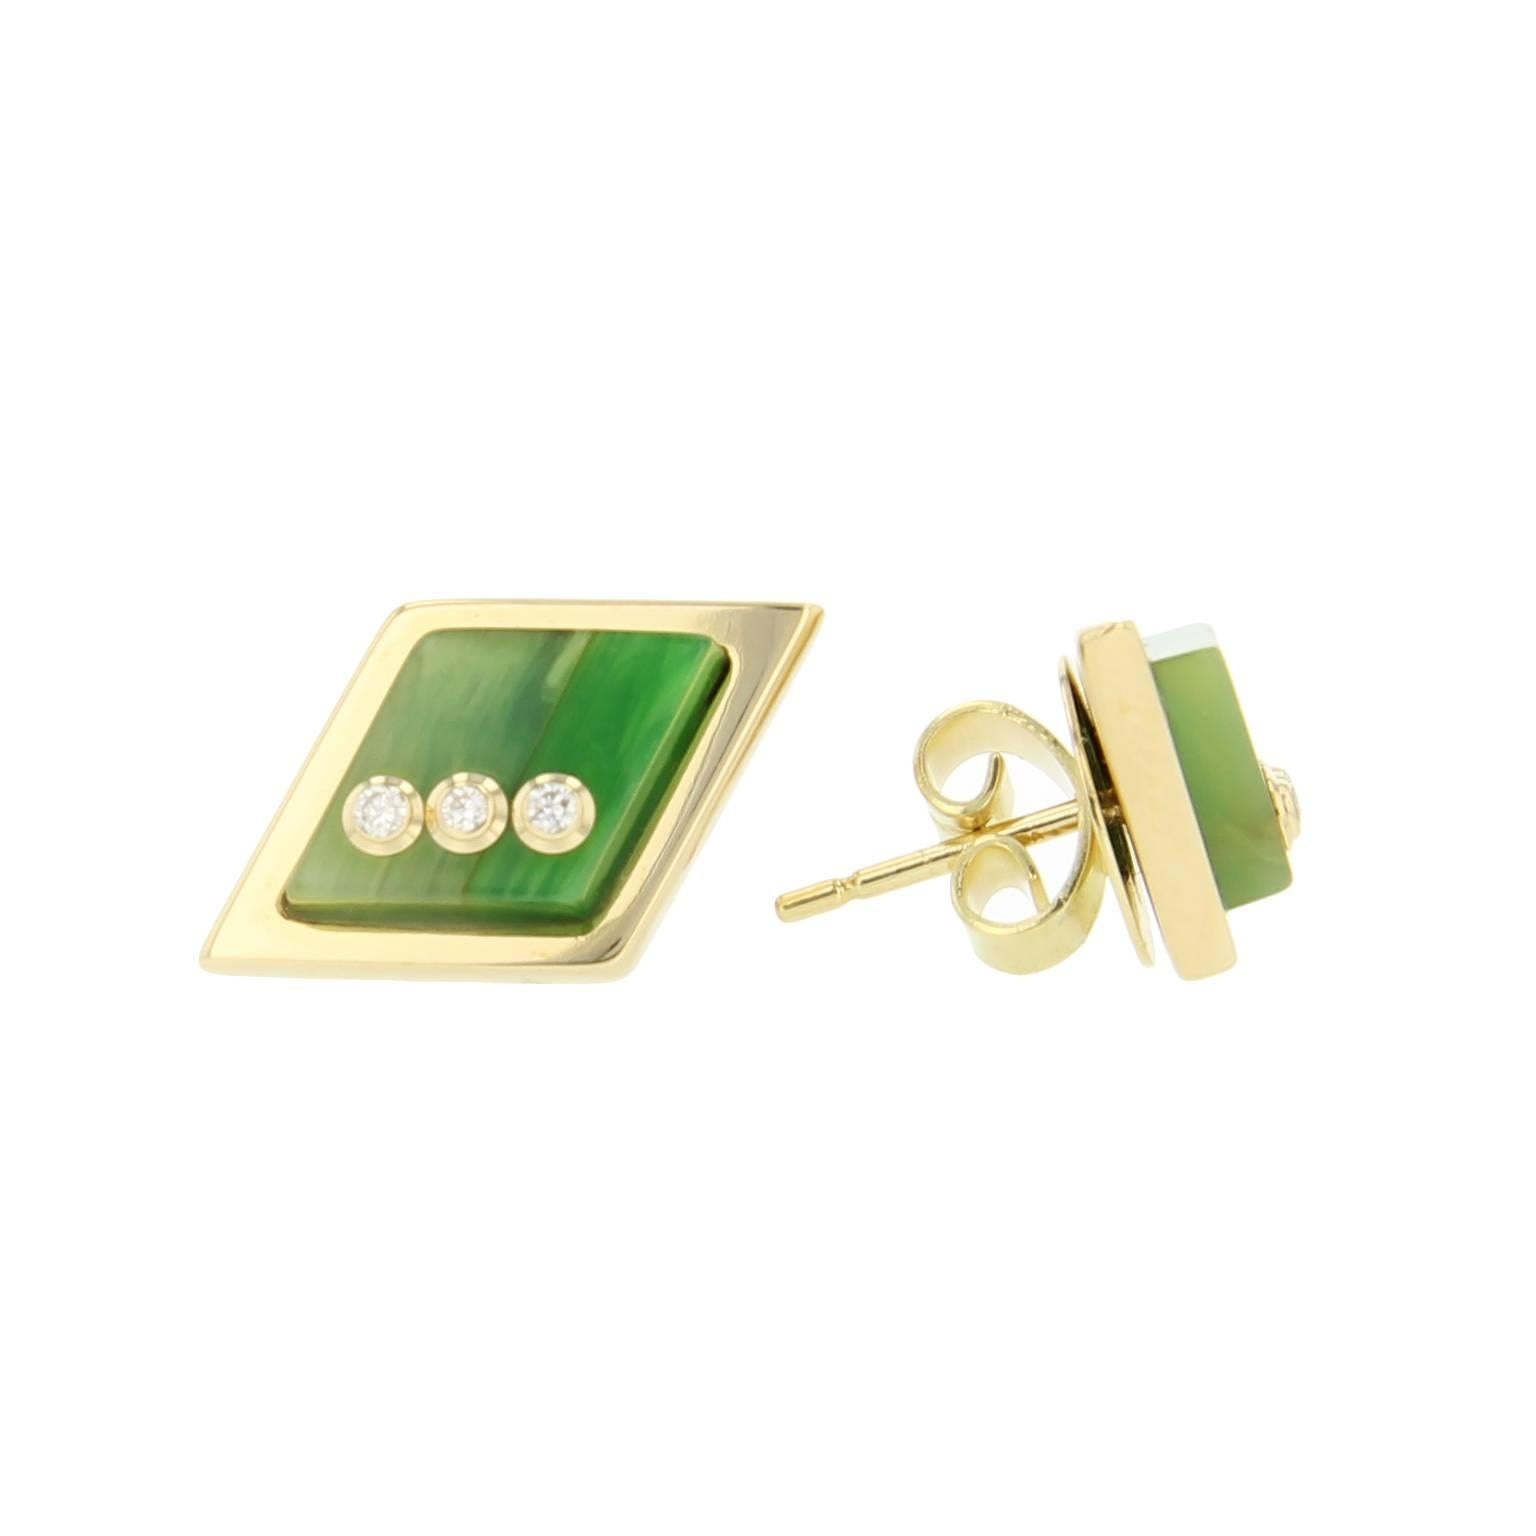 These kite-shaped stud earrings were handcrafted using laminated pieces of marbled green bakelite mounted in polished 18k yellow gold bezels.  Each with a row of three fine diamonds set in individual 18k yellow gold bezels.

Full details below: 
•